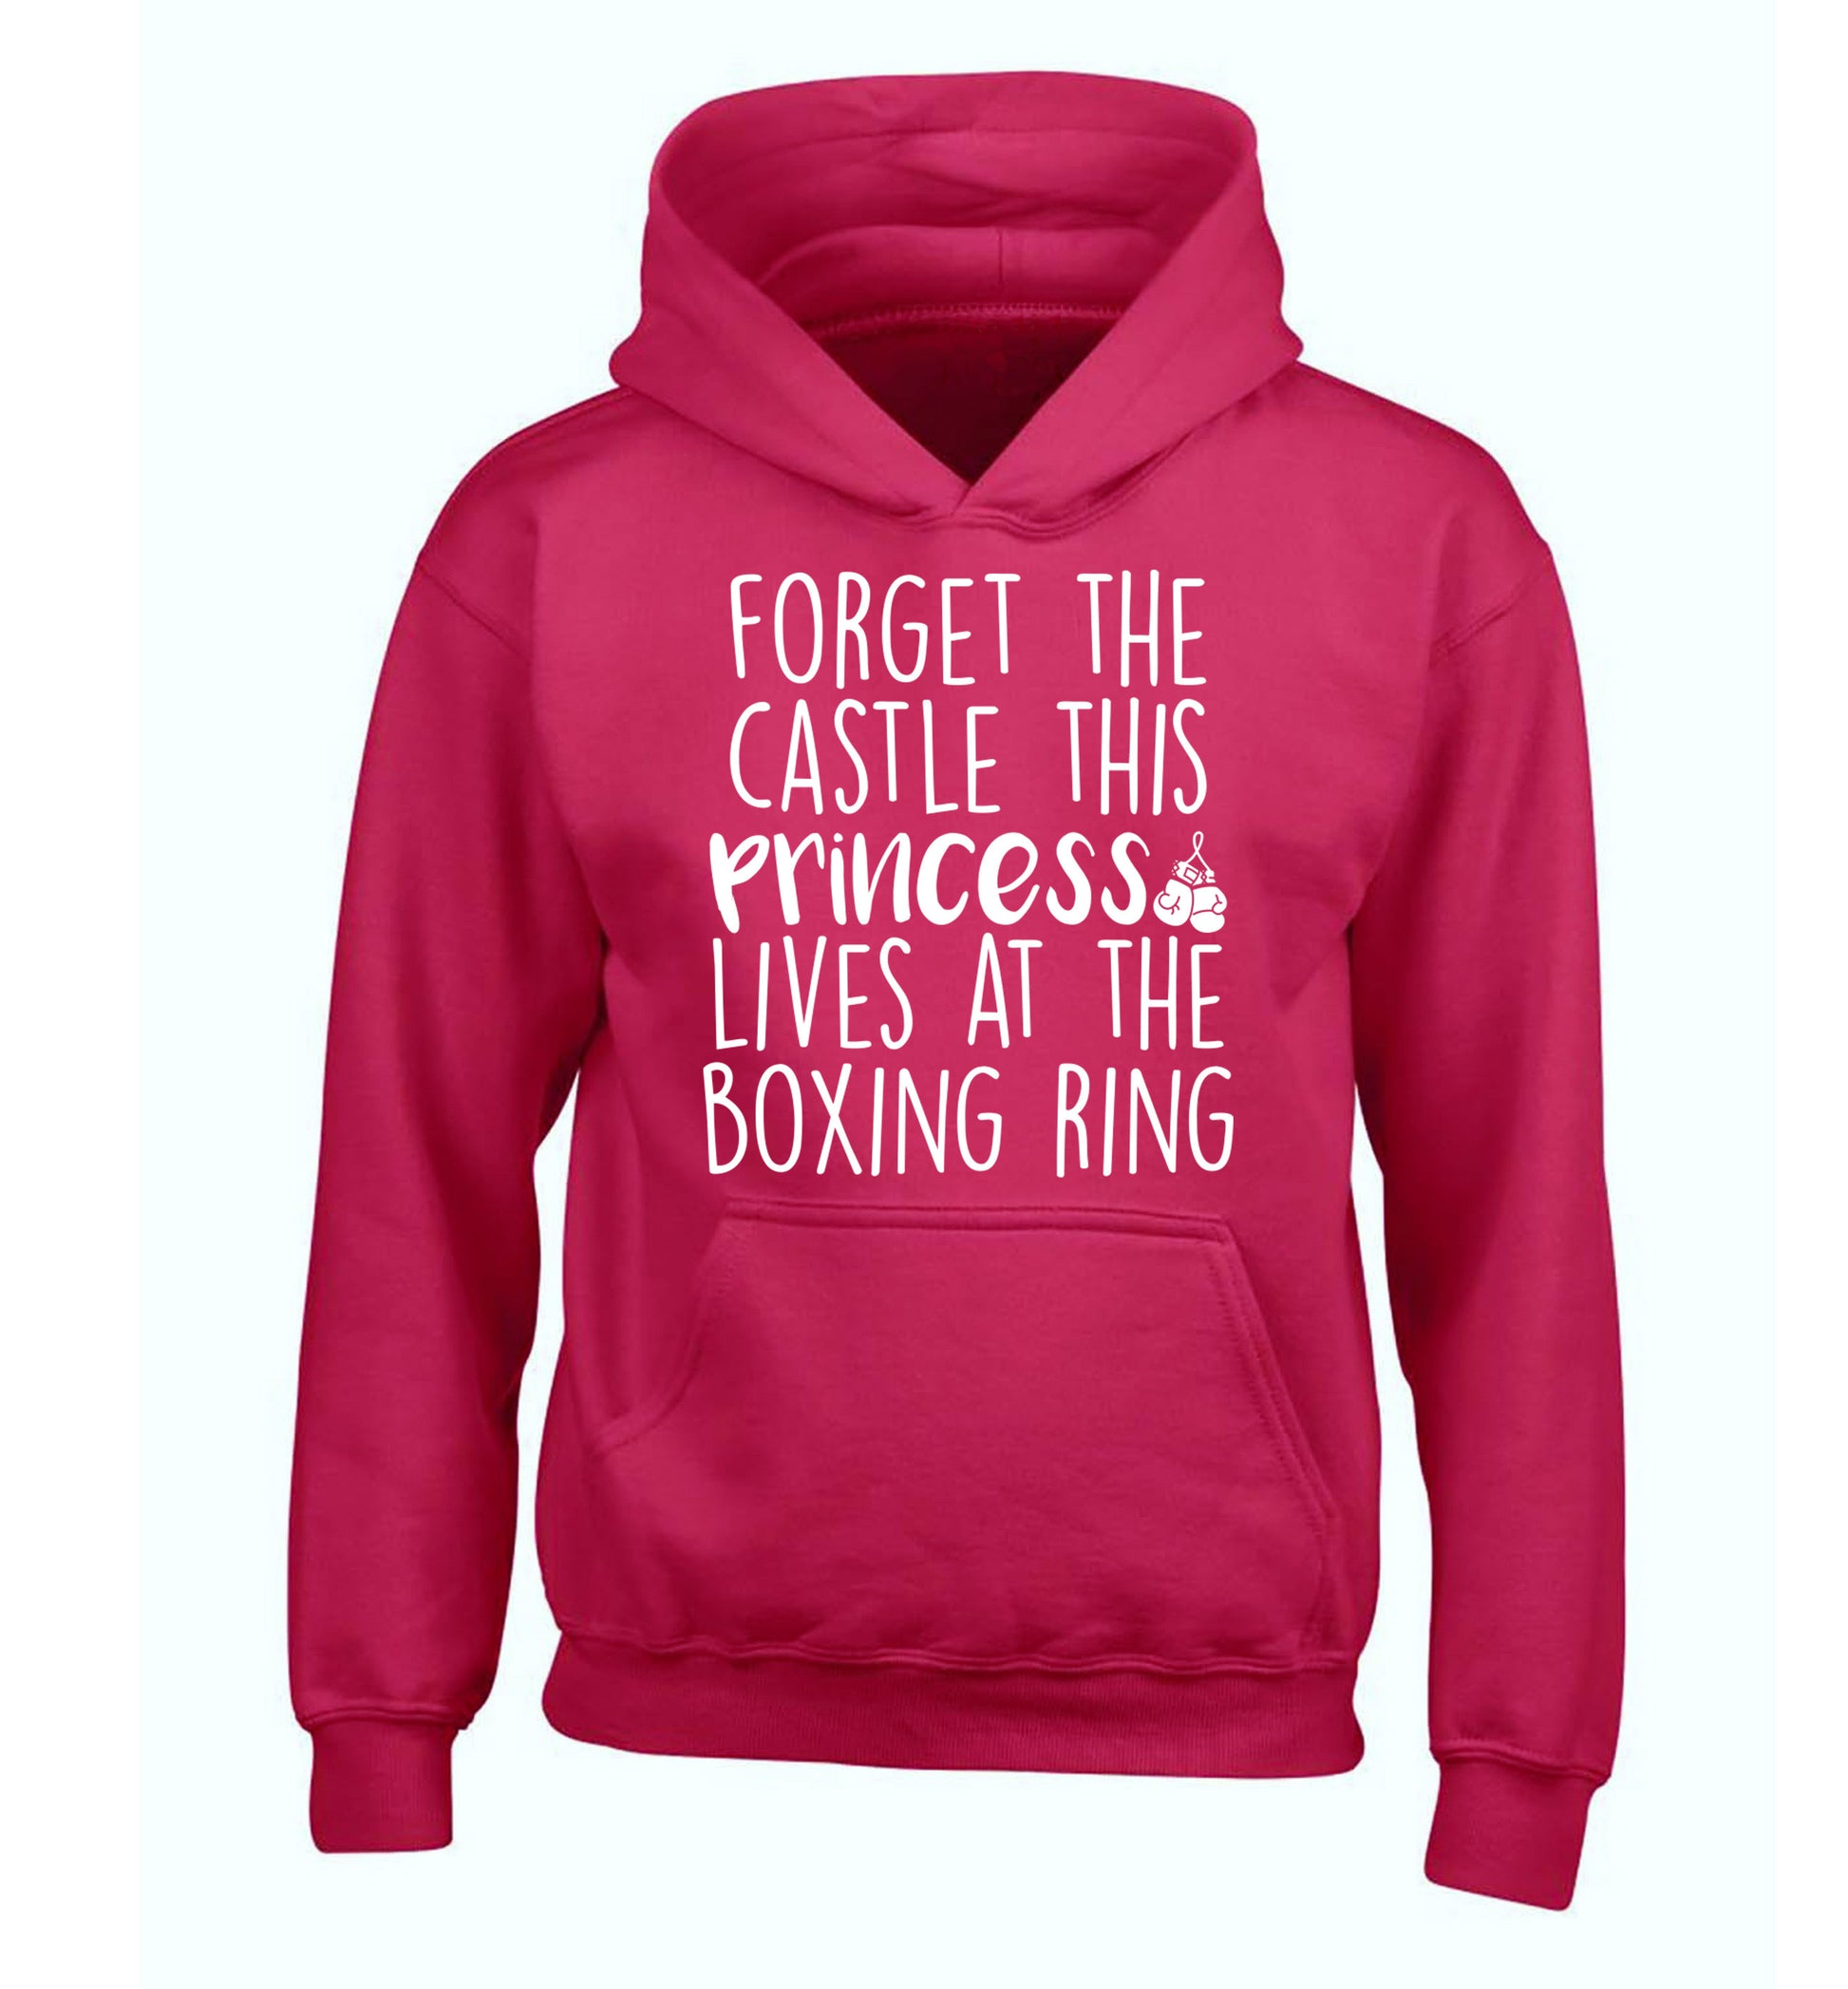 Forget the castle this princess lives at the boxing ring children's pink hoodie 12-14 Years